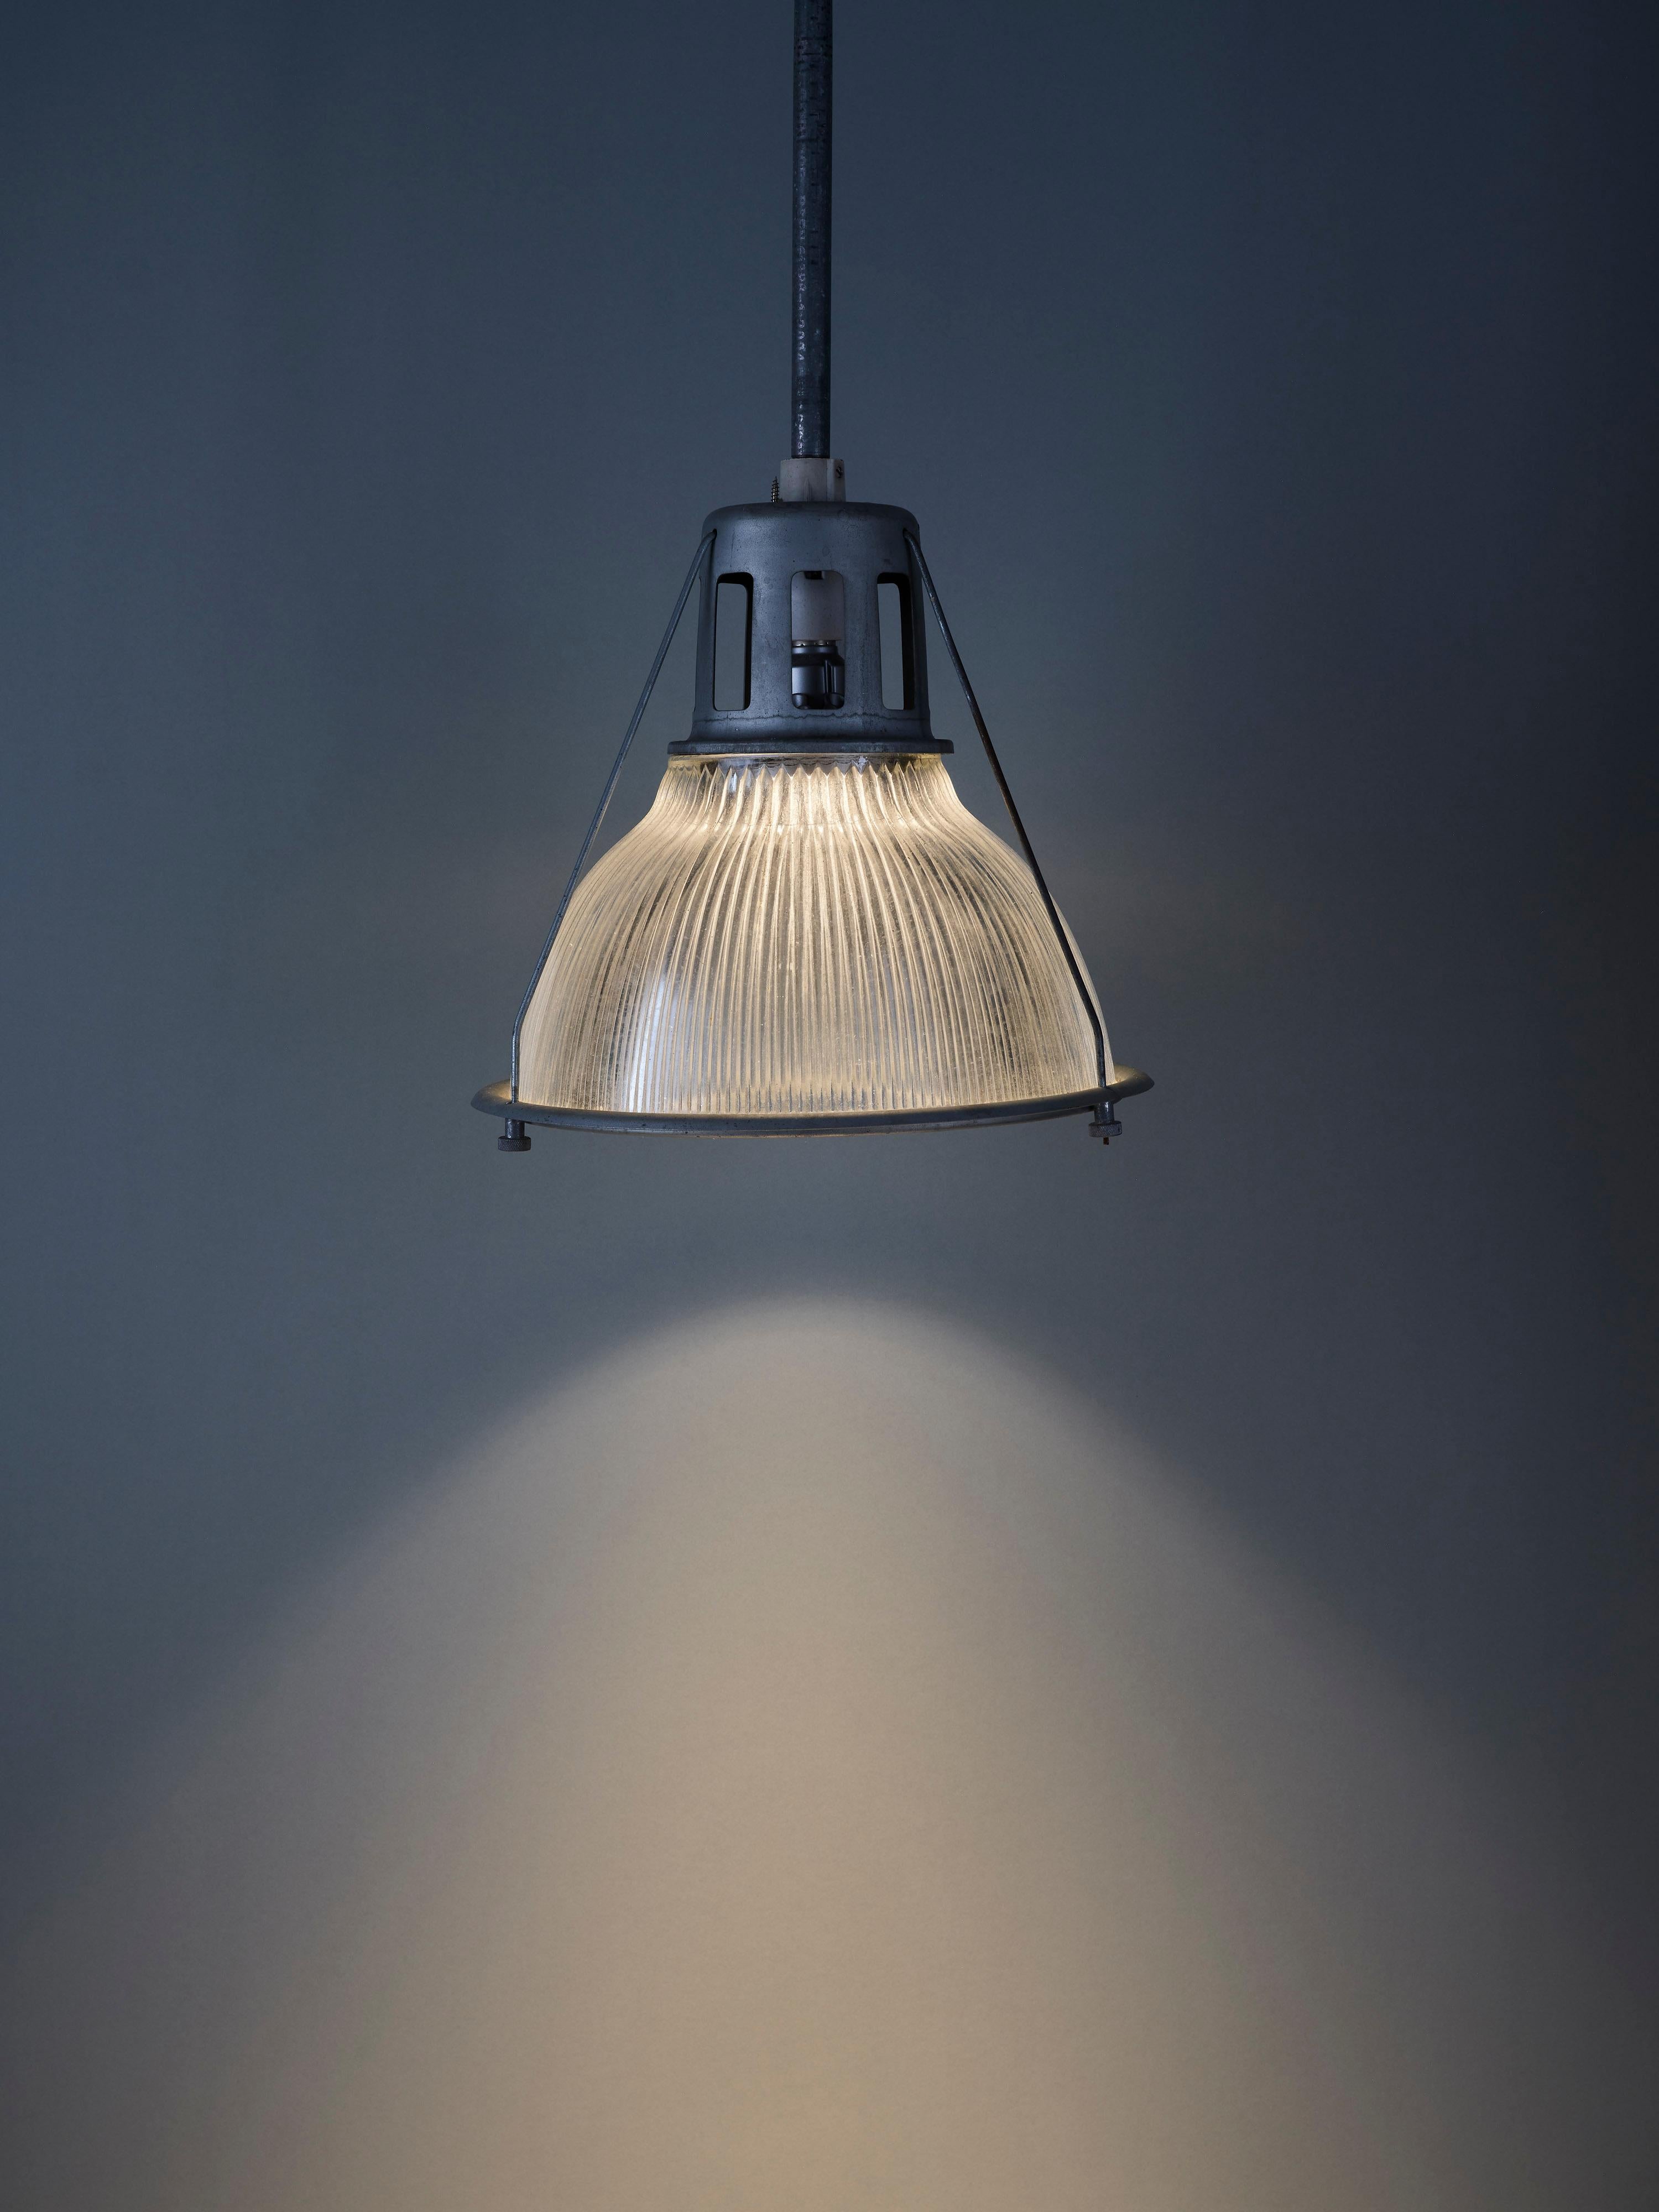 Crafted by renowned company Holophane, pioneers of prismatic lighting in late 19th-century US, this industrial light boasts historical significance. Its prismatic glass disperses light evenly, offering gentle illumination that remains easy on the